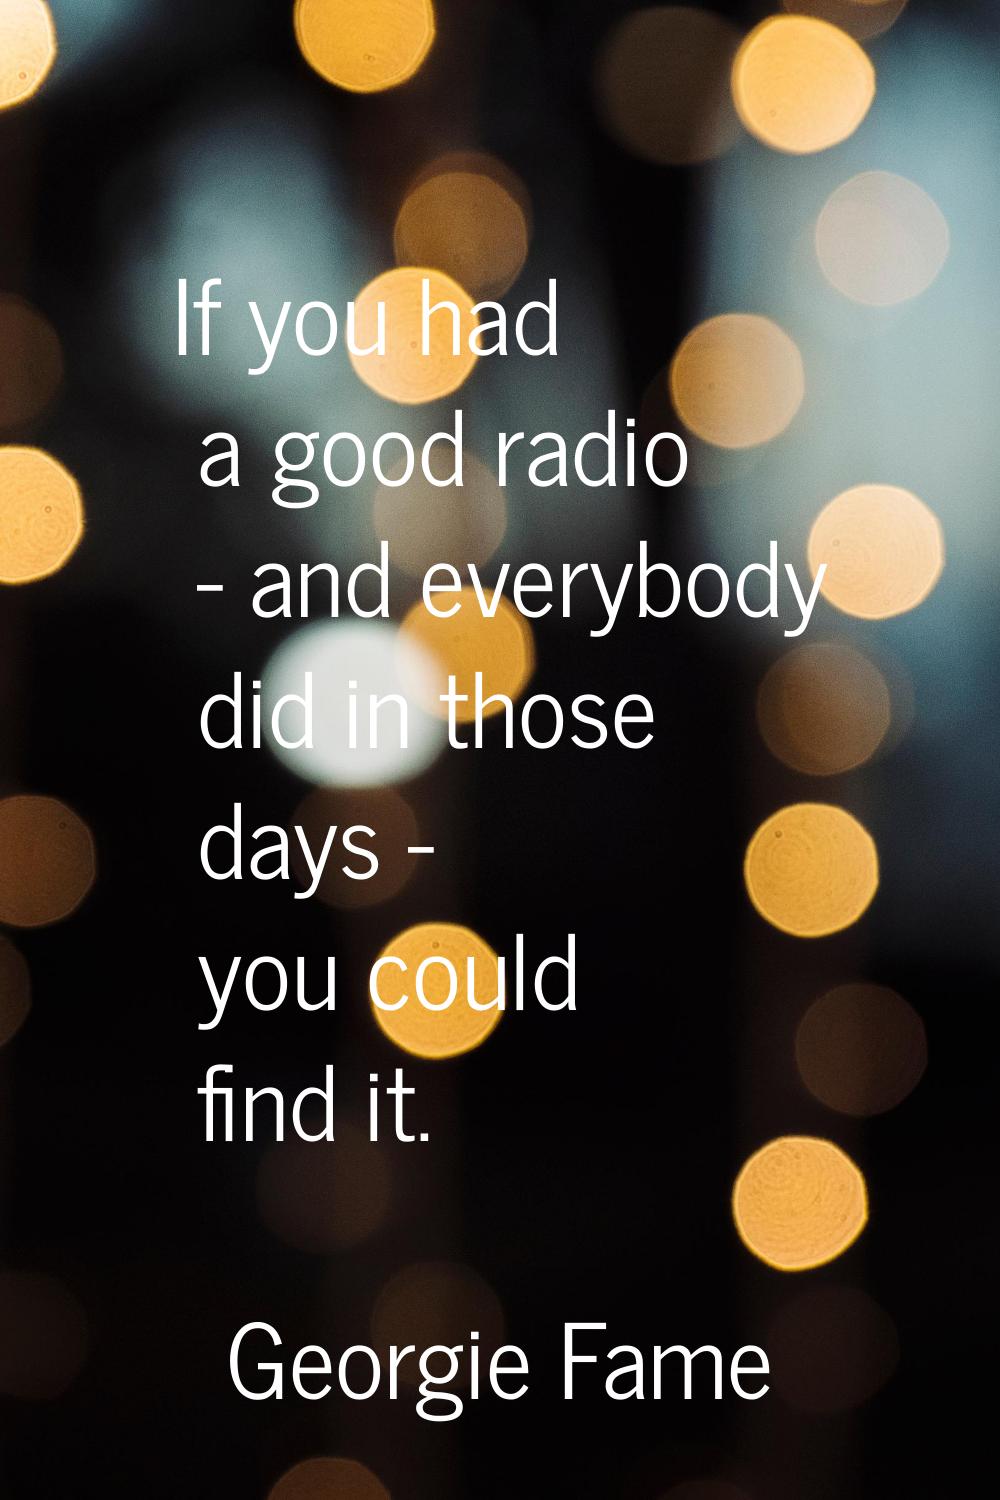 If you had a good radio - and everybody did in those days - you could find it.